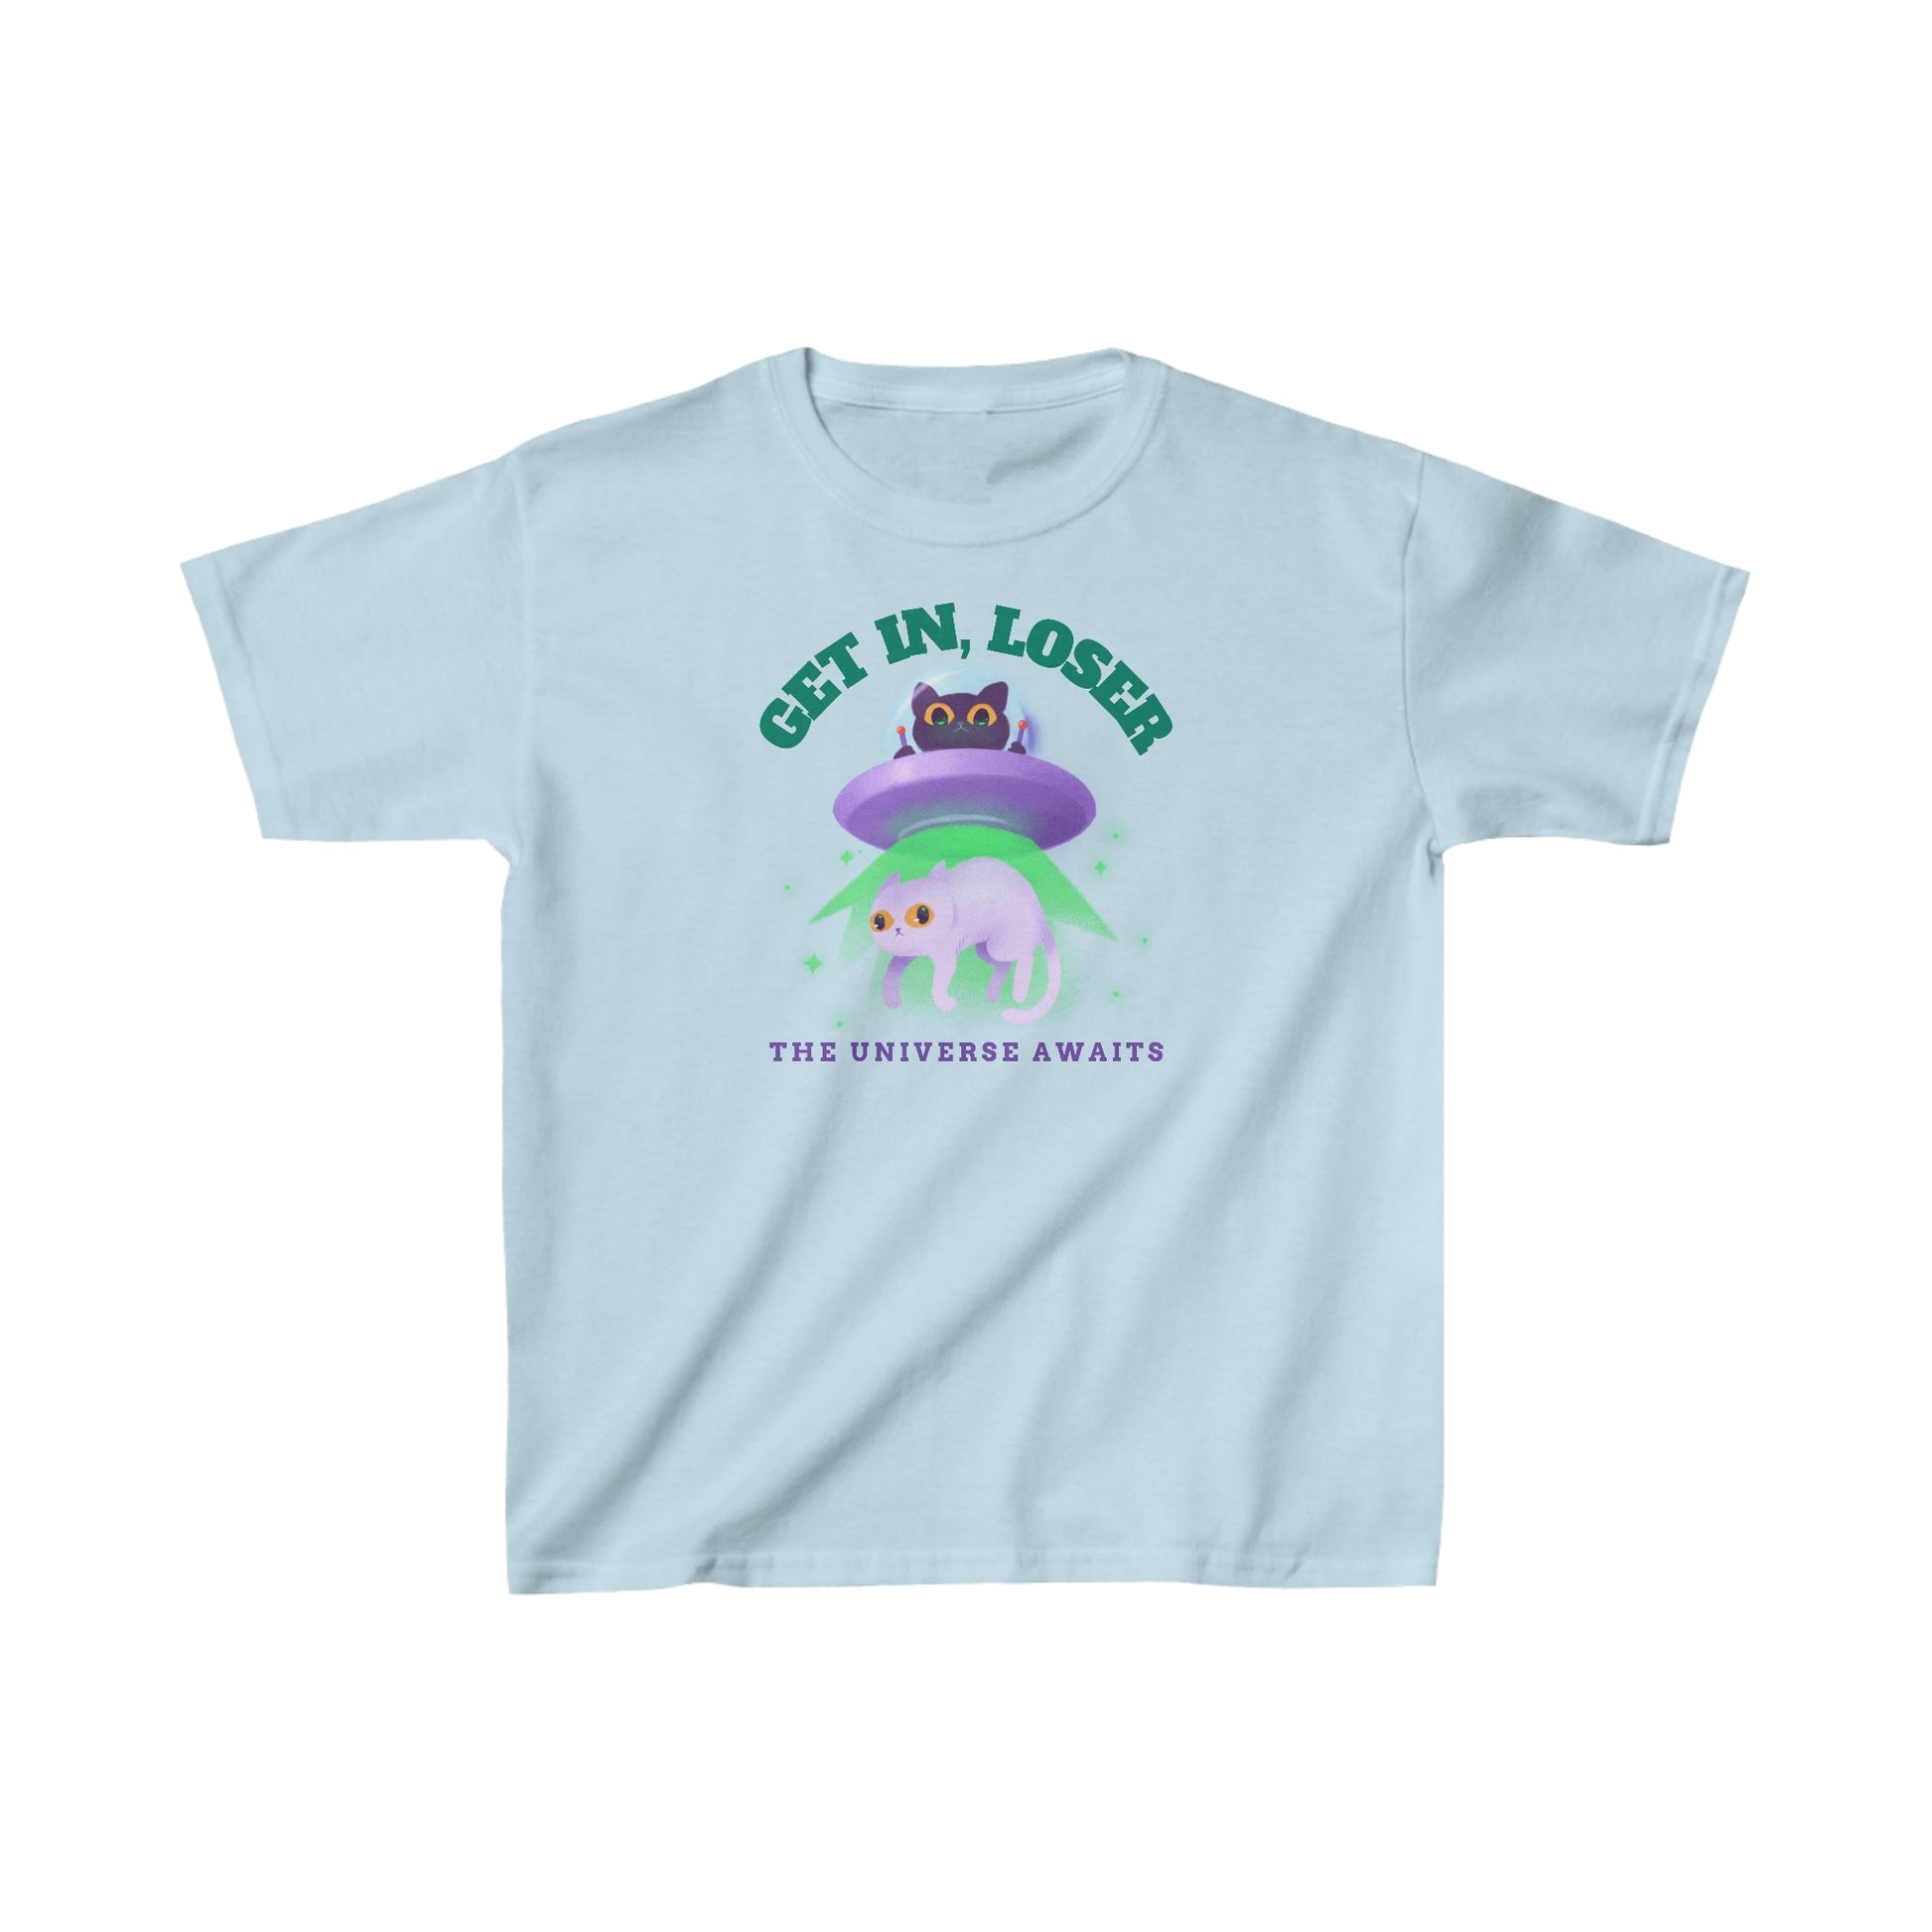 CrazyYetiClothing, CYC, Get in, Loser (Kids Tee), Kids clothes